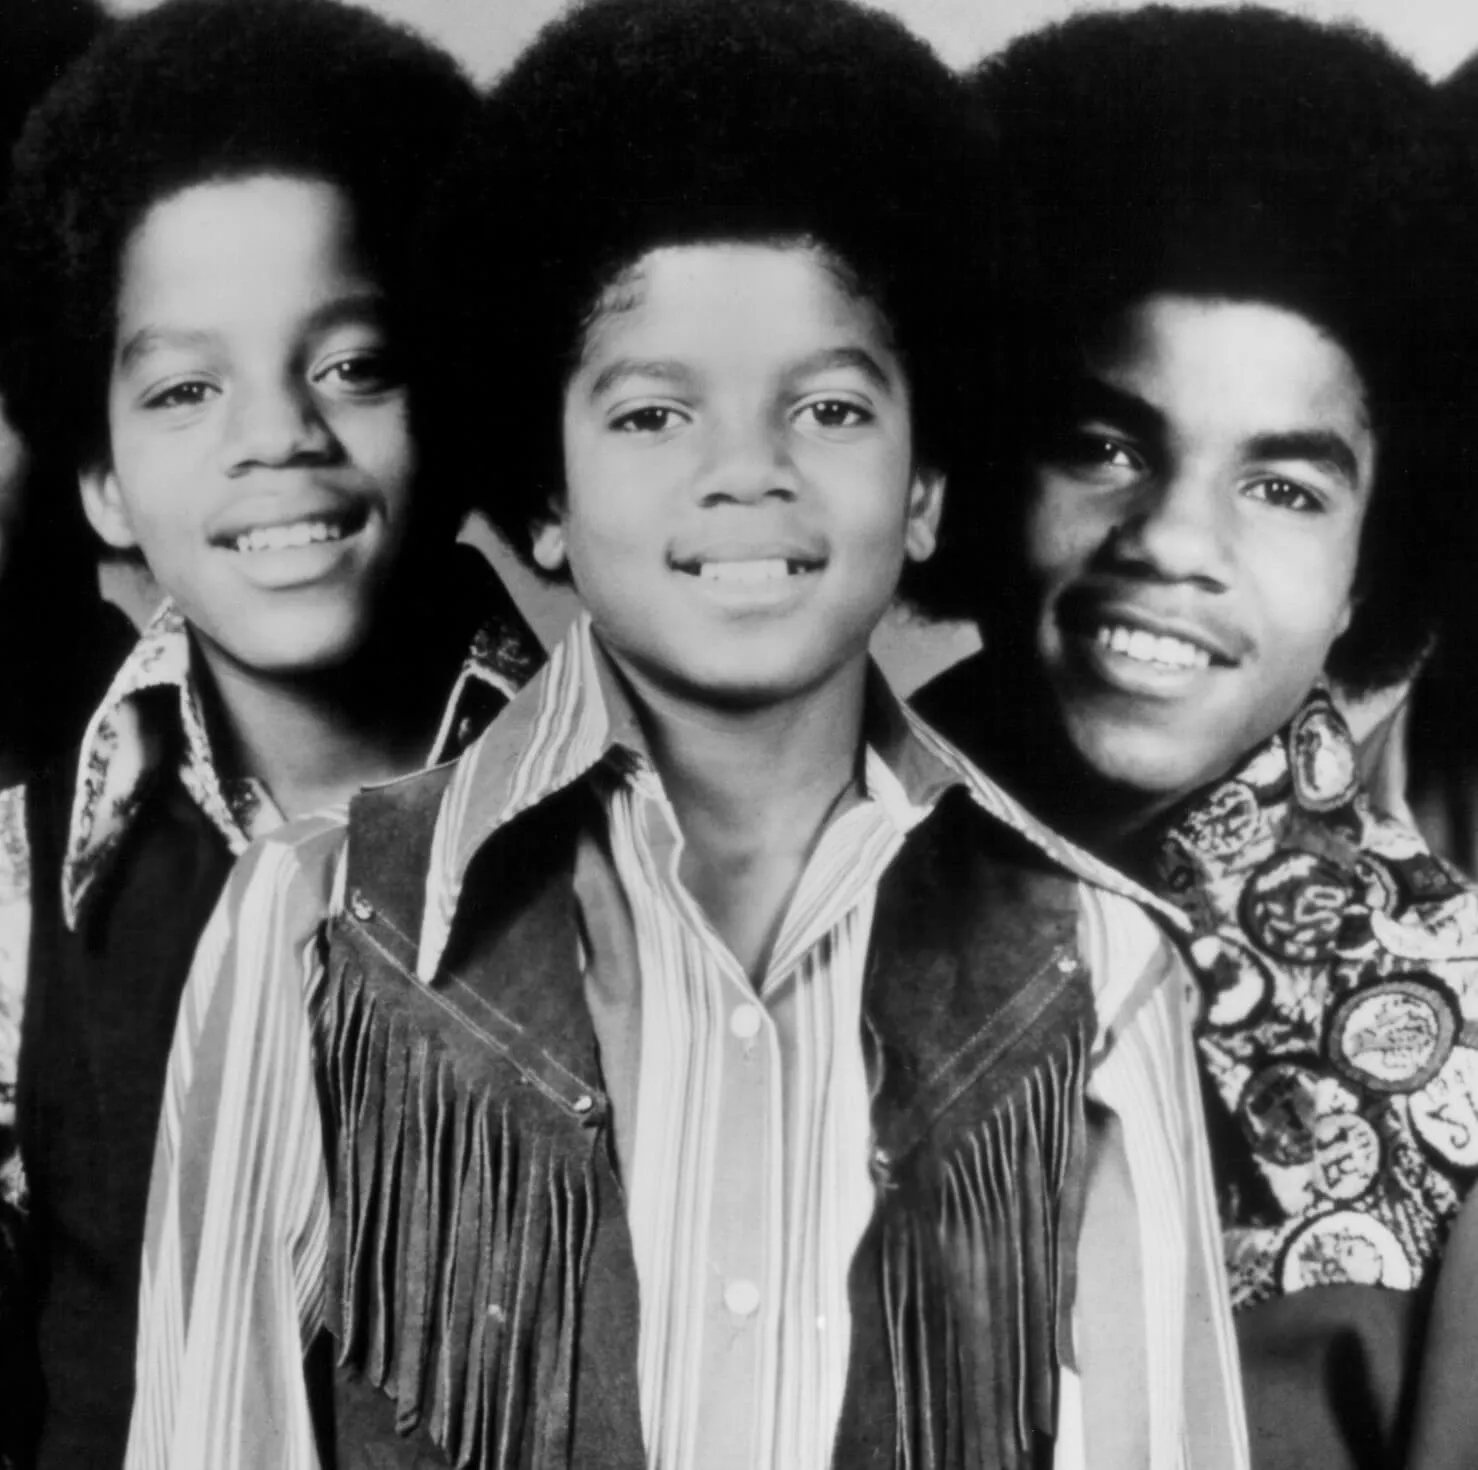 Members of The Jackson 5 smiling